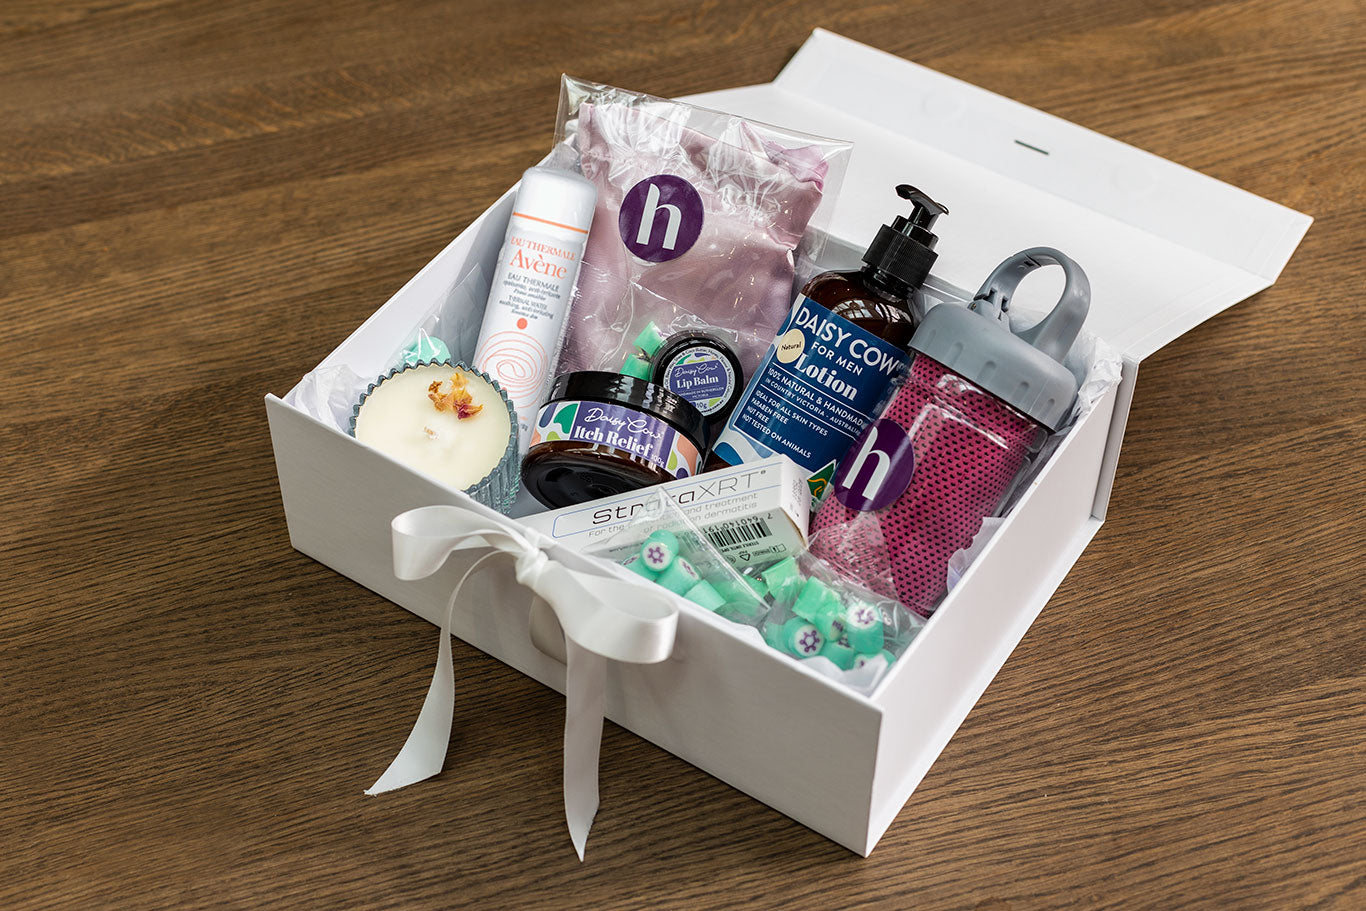 The HOPE Radiotherapy Gift Pack For Her